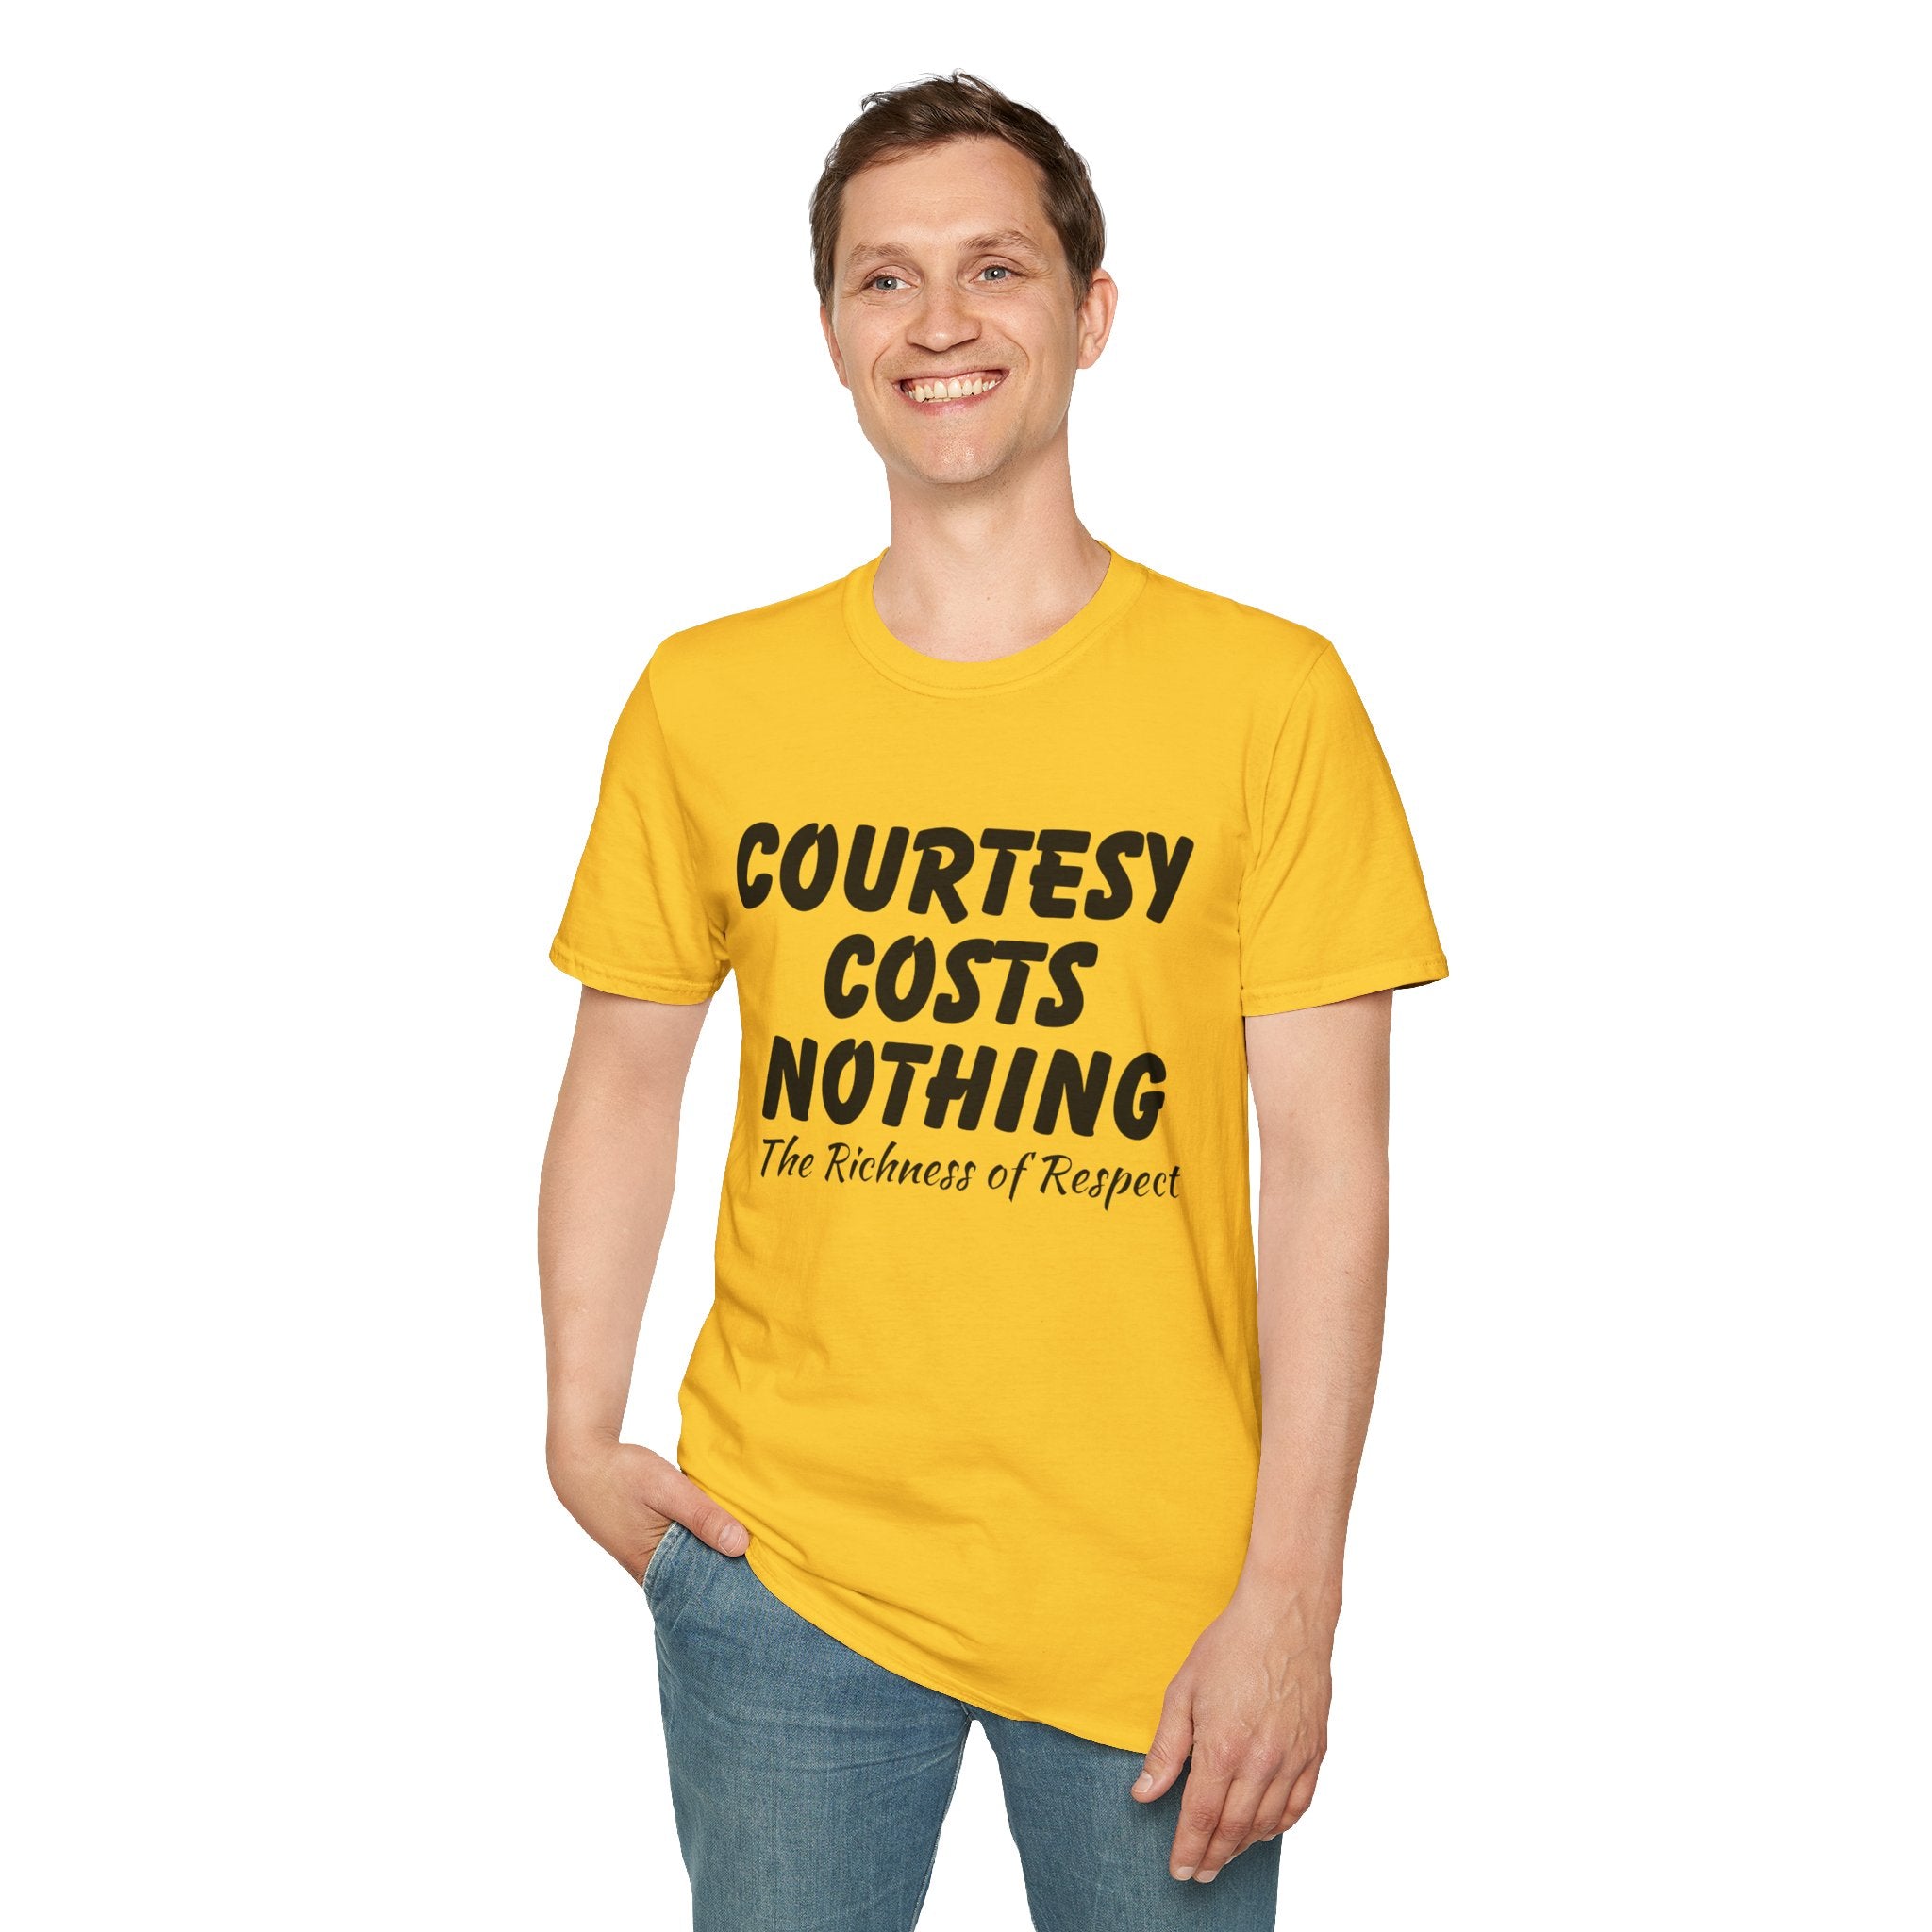 Courtesy Cost Nothing T-shirt, Spread Courtesy, Awareness T-Shirt, Courtesy Is Contagious, Stop Bullying, Anti-Bullying Shirt, Richness of Respect, Kindness